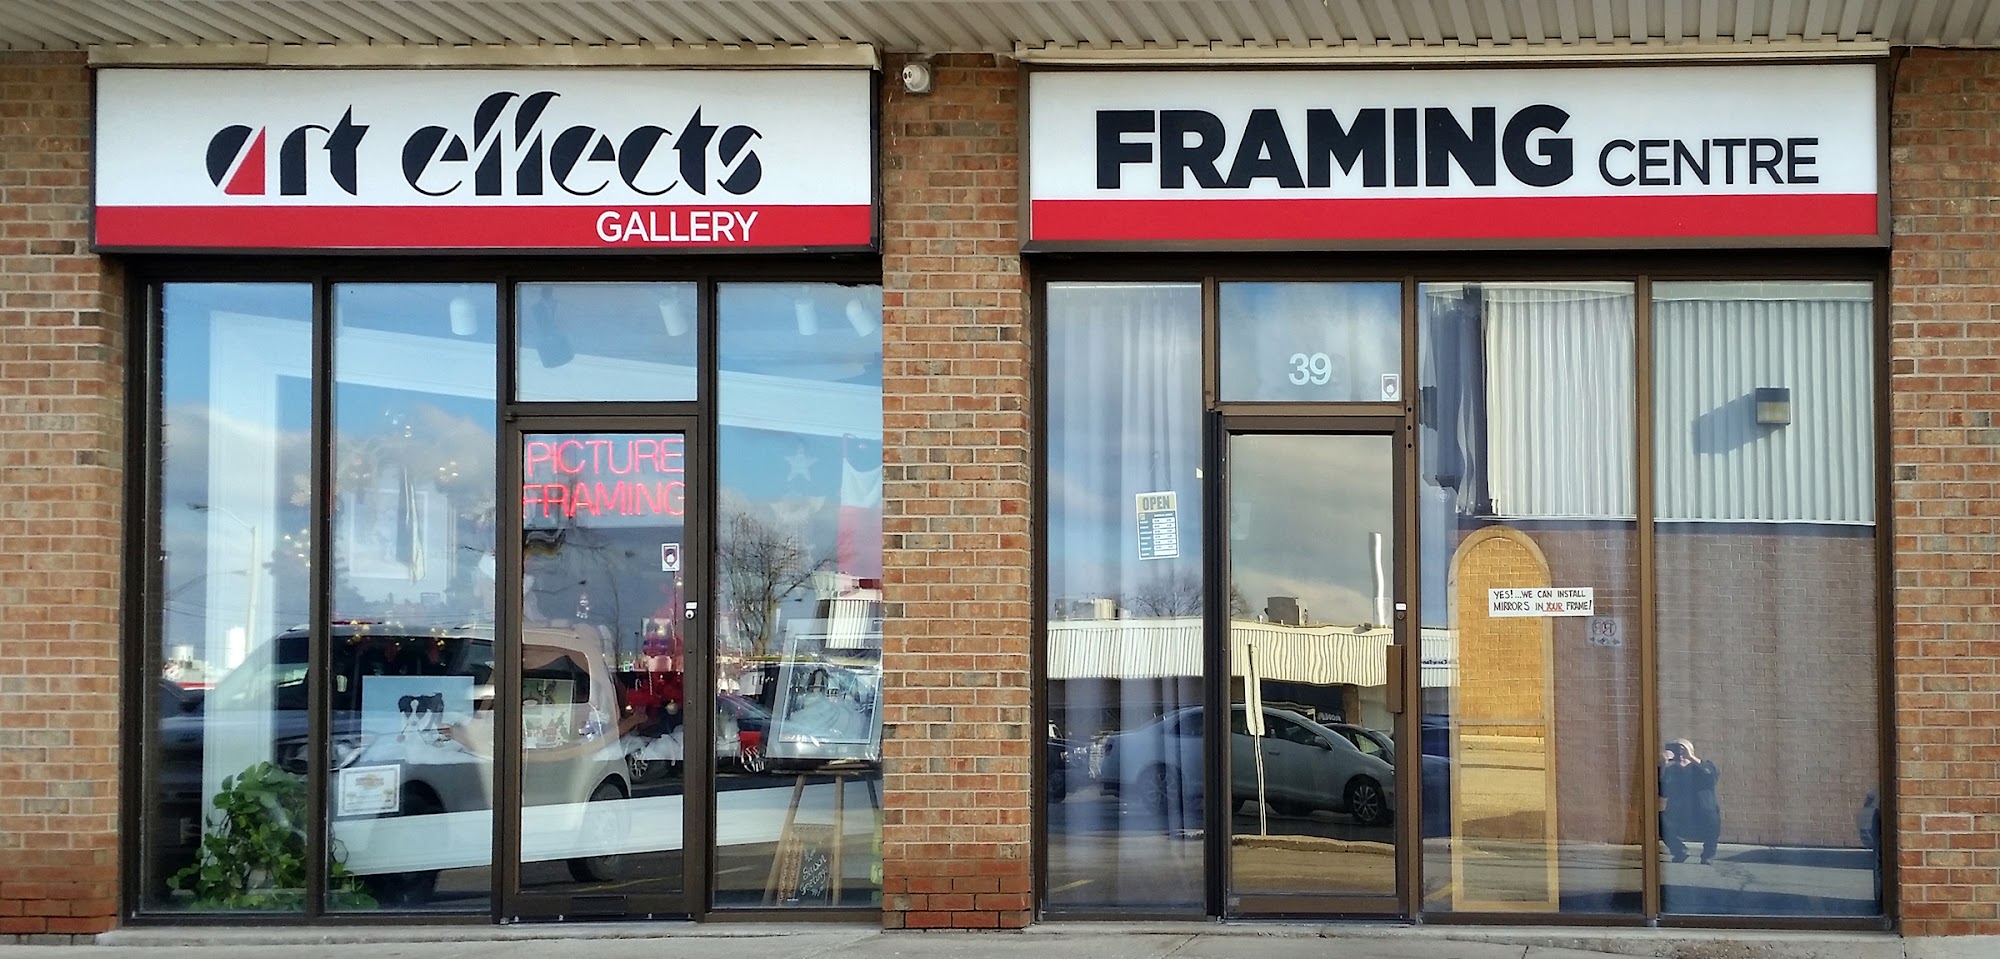 Art Effects Gallery and Framing